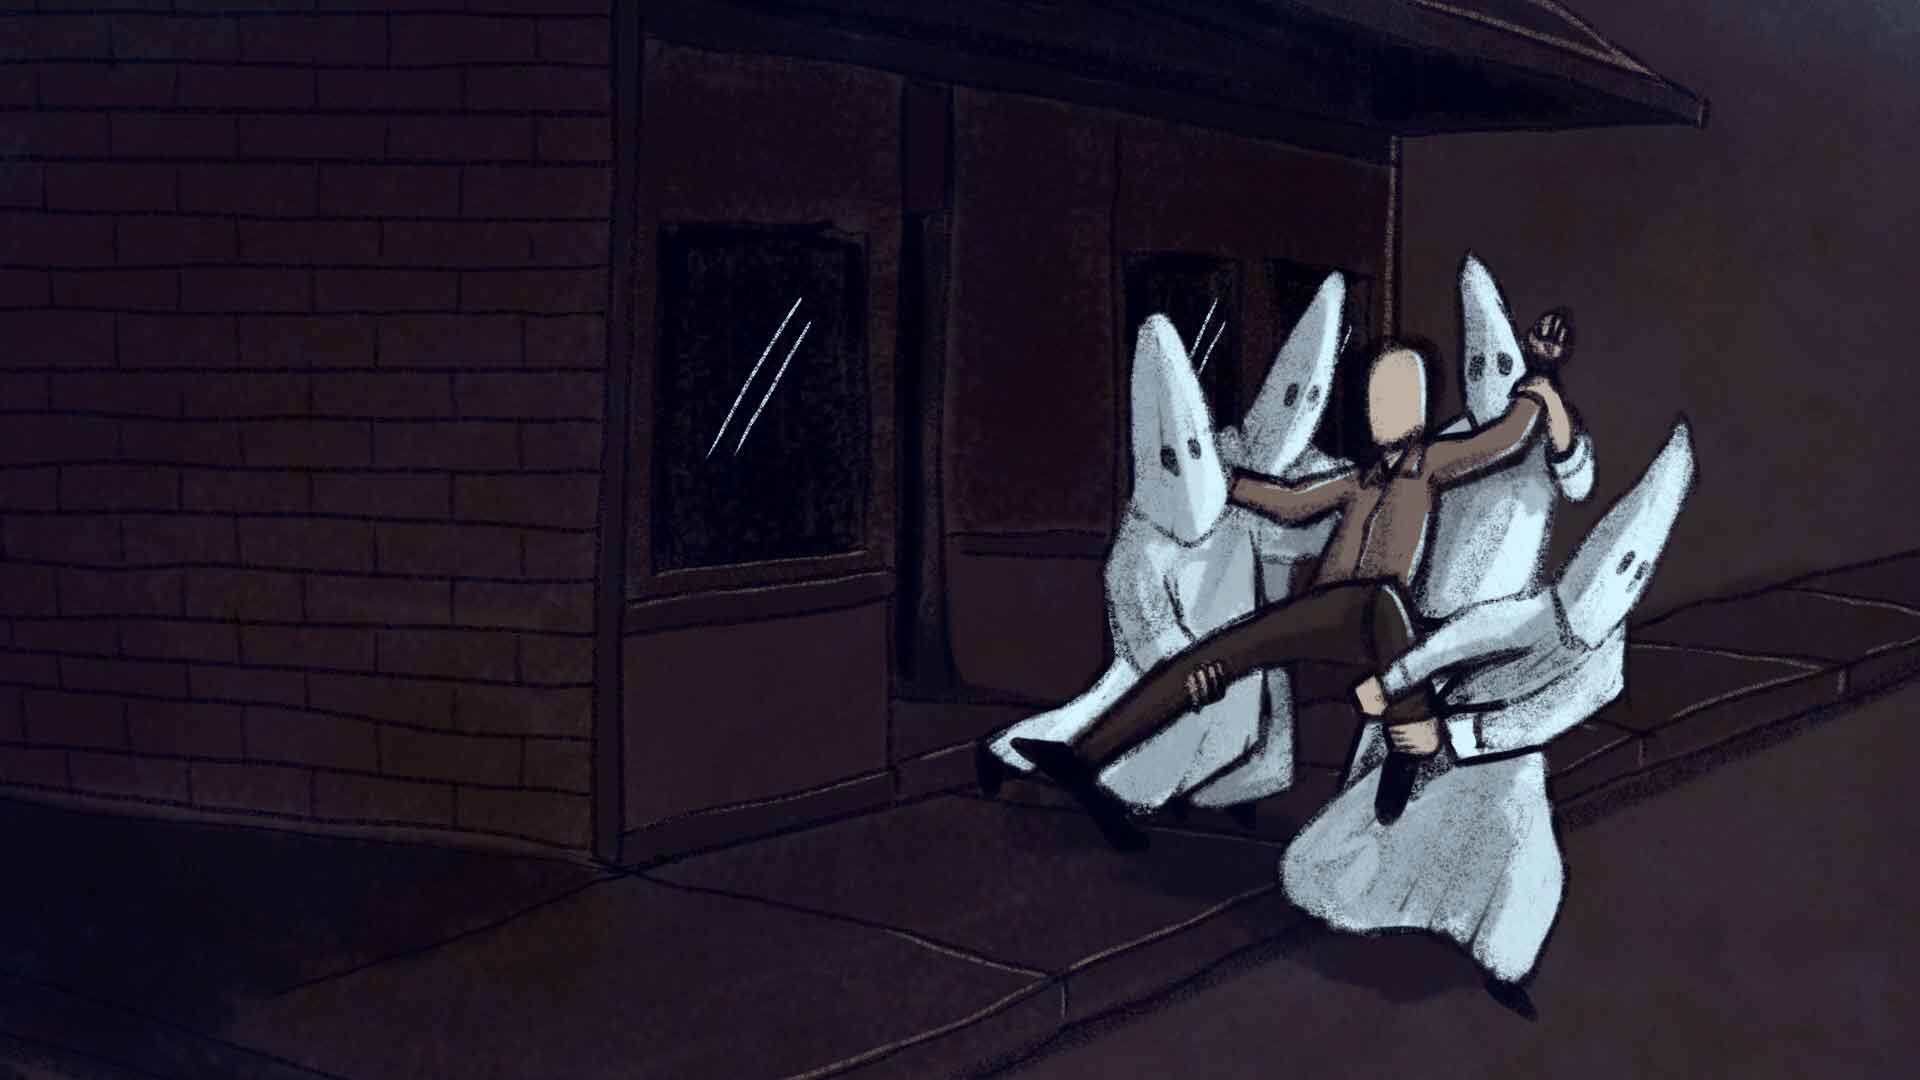 animated still of man being dragged away by ghosts